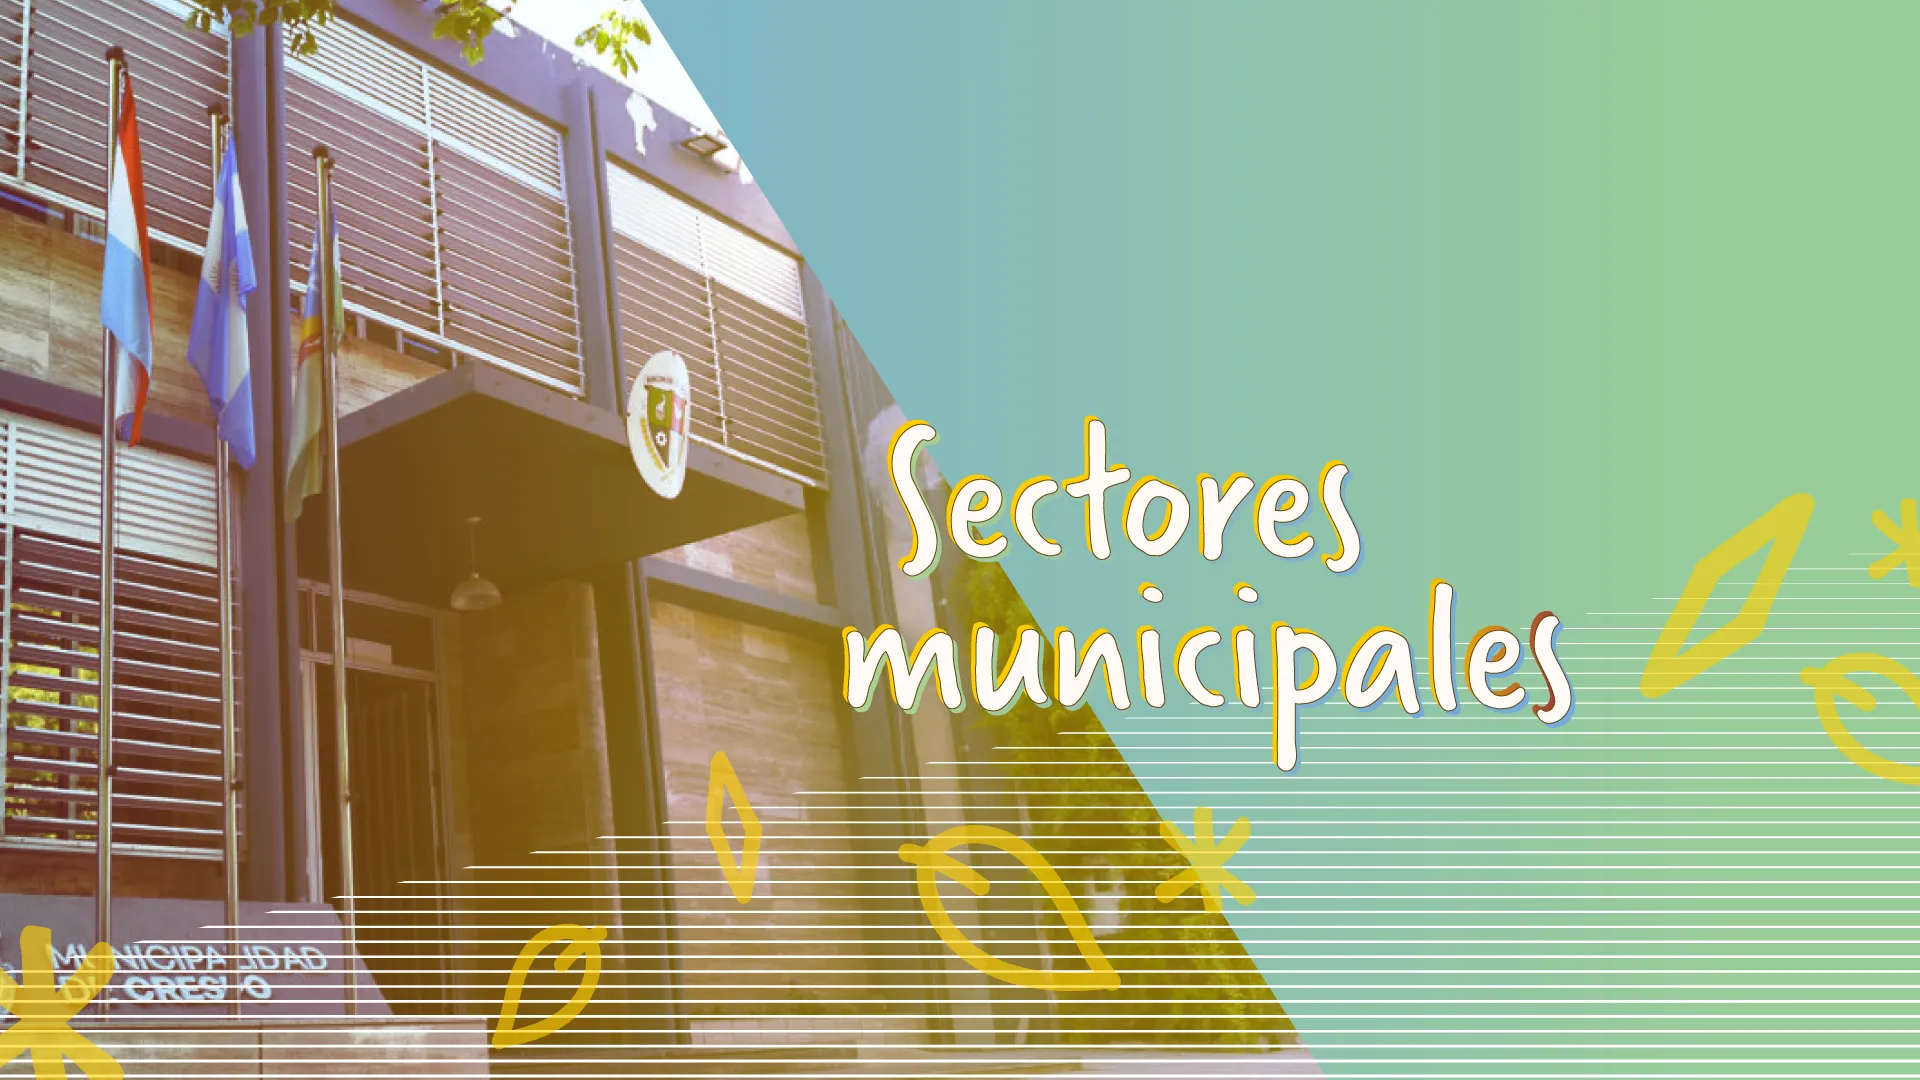 Sectores municipales